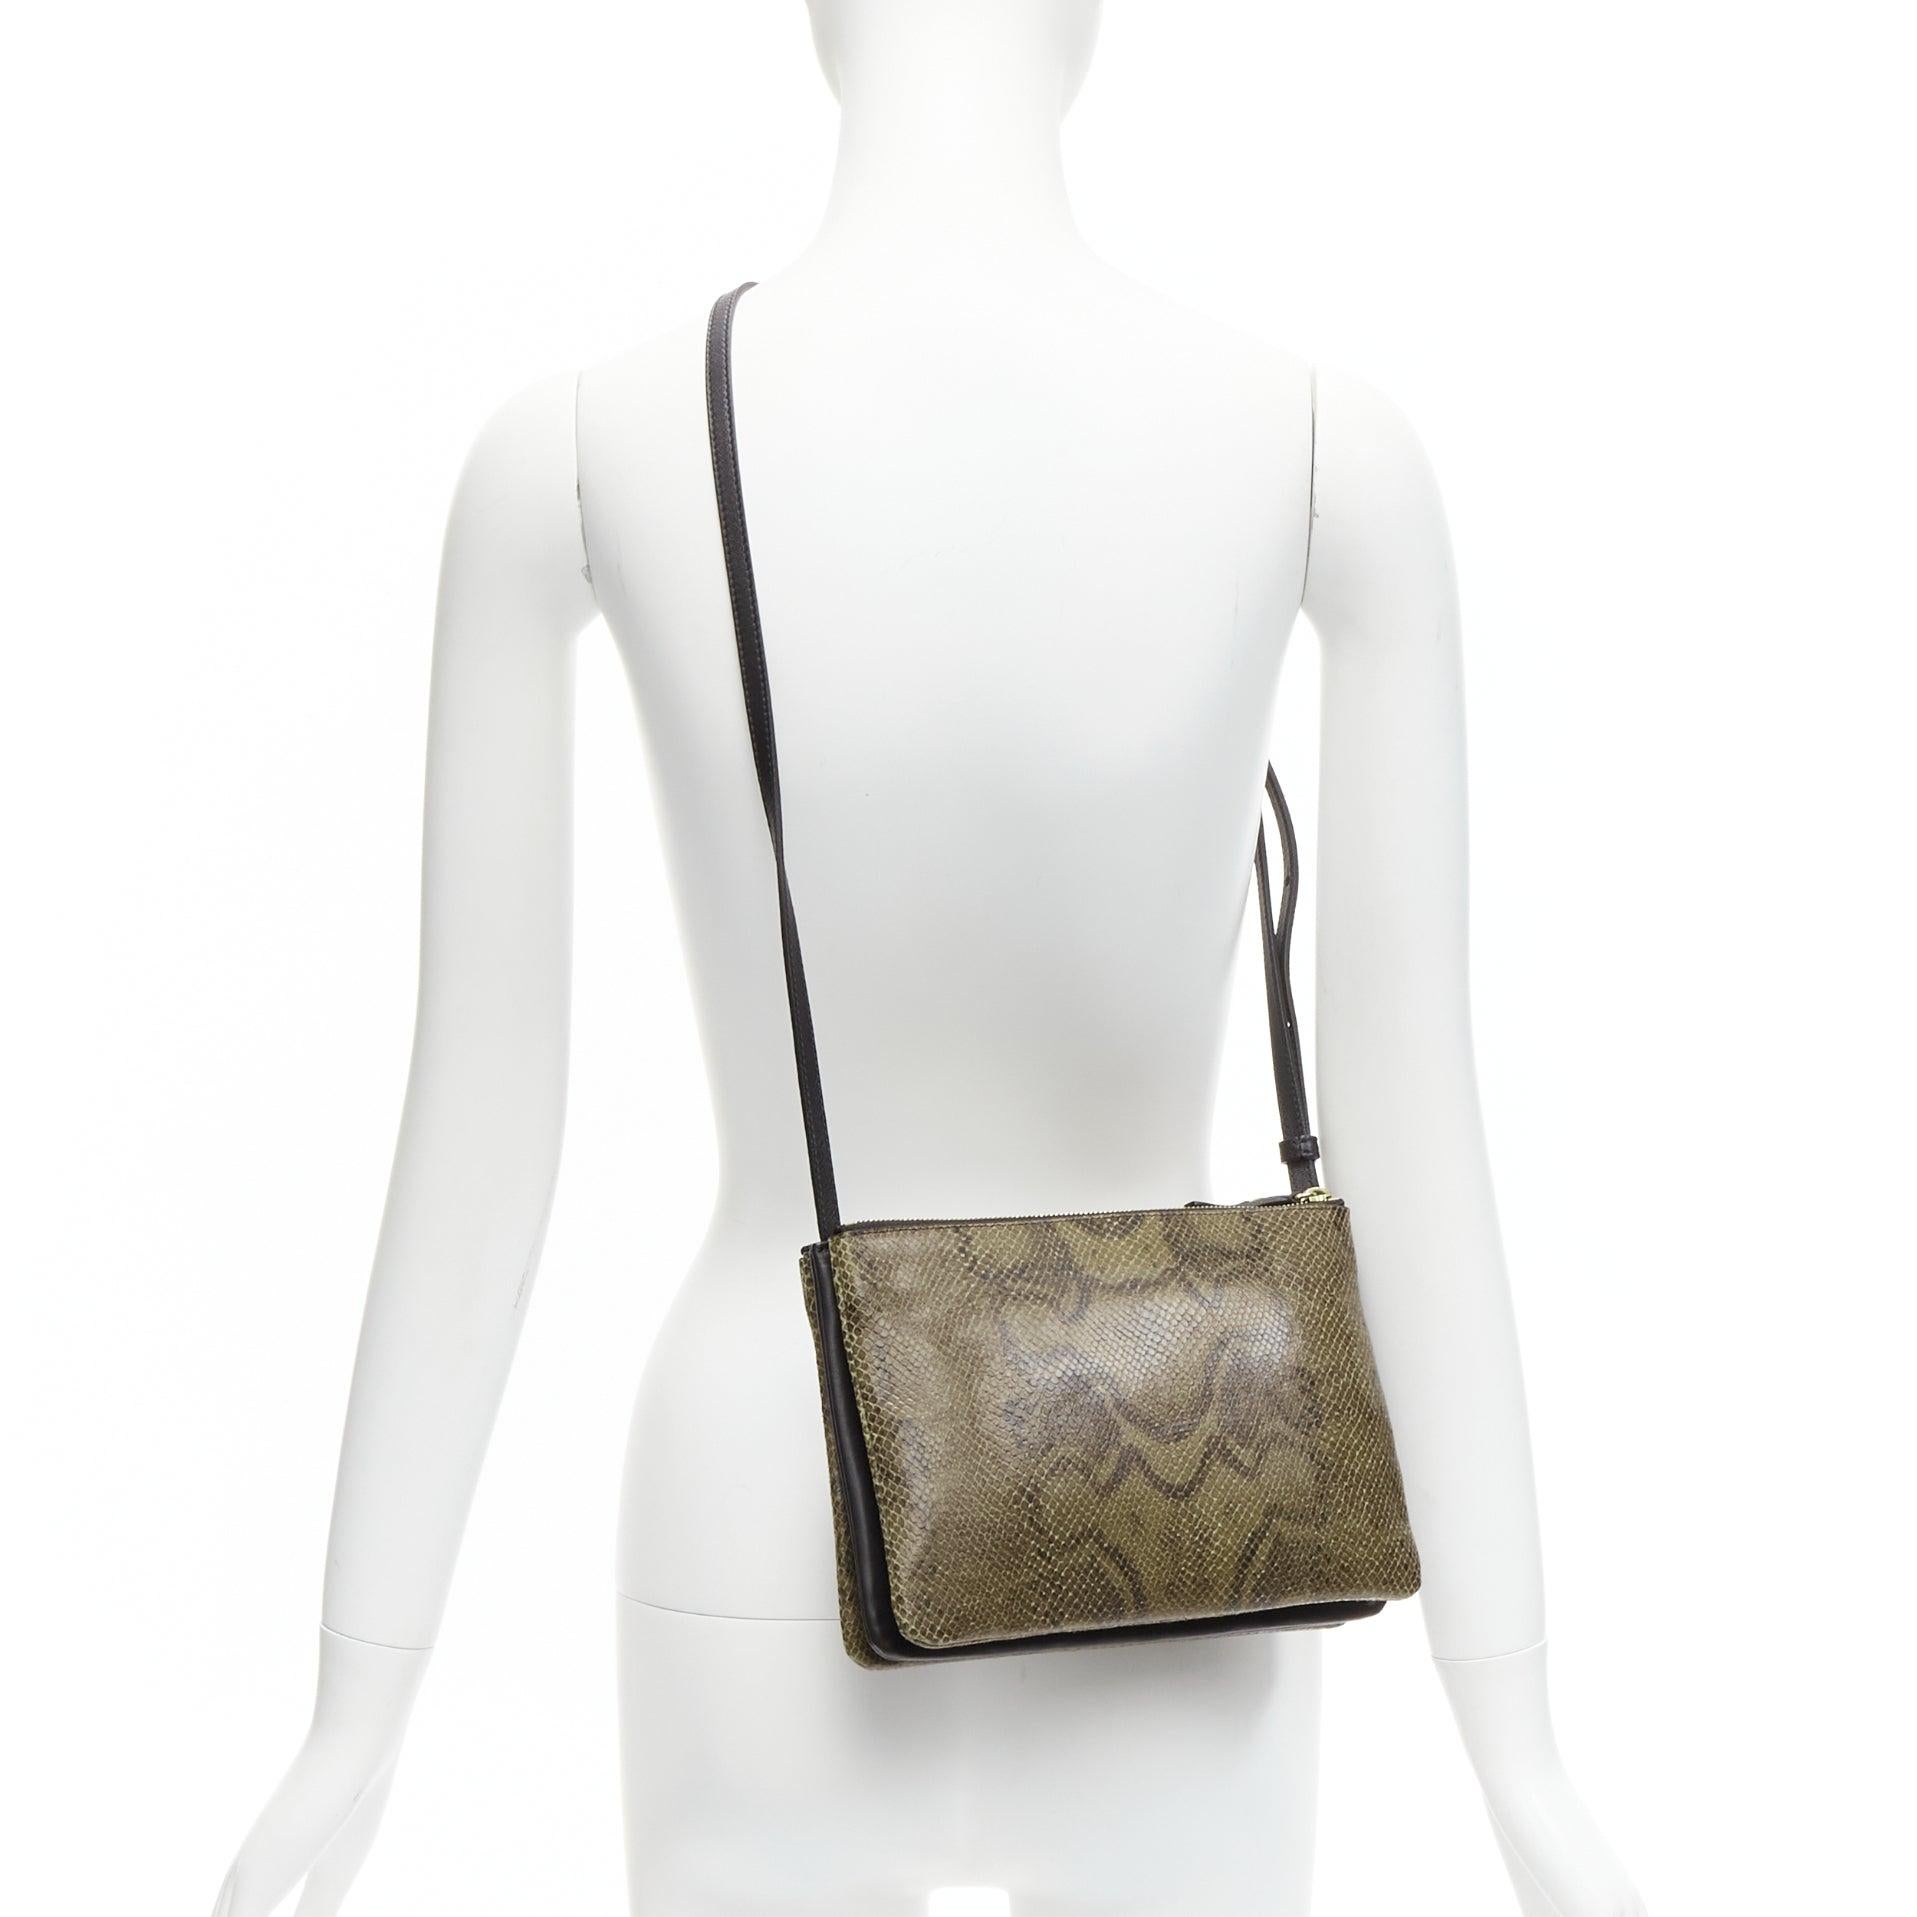 OLD CELINE Small Trio brown scaled leather detachable shoulder pouch bag
Reference: TGAS/D00684
Brand: Celine
Designer: Phoebe Philo
Model: Trio Small
Material: Faux Leather
Color: Brown, Black
Pattern: Animal Print
Closure: Zip
Lining: Black